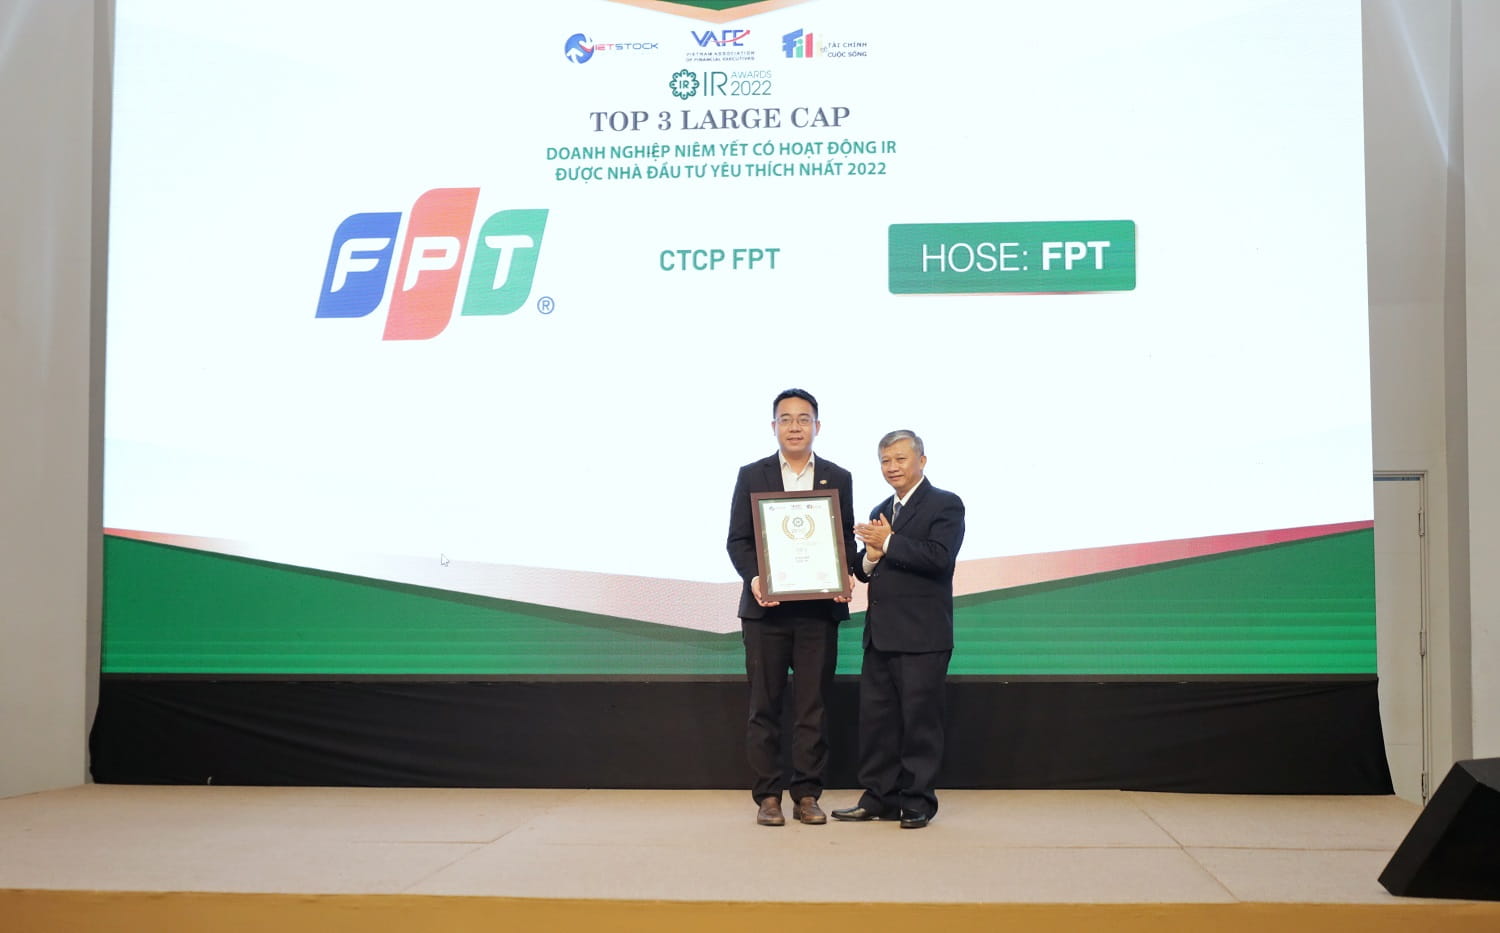 Representative of FPT, Mr. Vo Dang Phat, CMO, received the award of Top 3 Large-caps with the most favored IR activities by investors in 2022